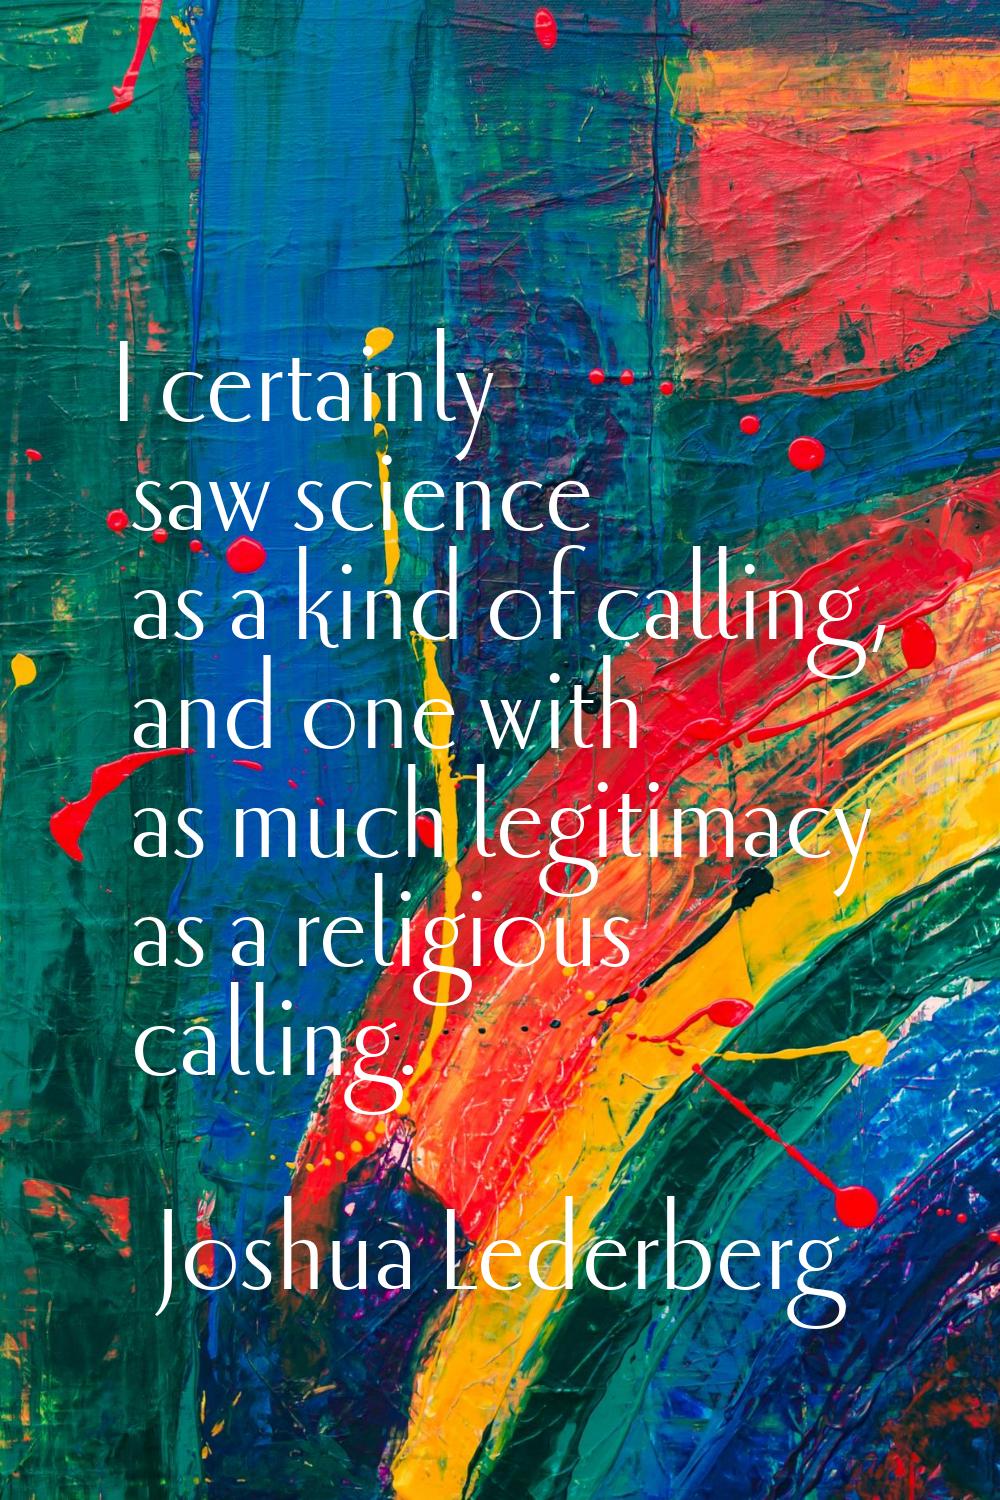 I certainly saw science as a kind of calling, and one with as much legitimacy as a religious callin